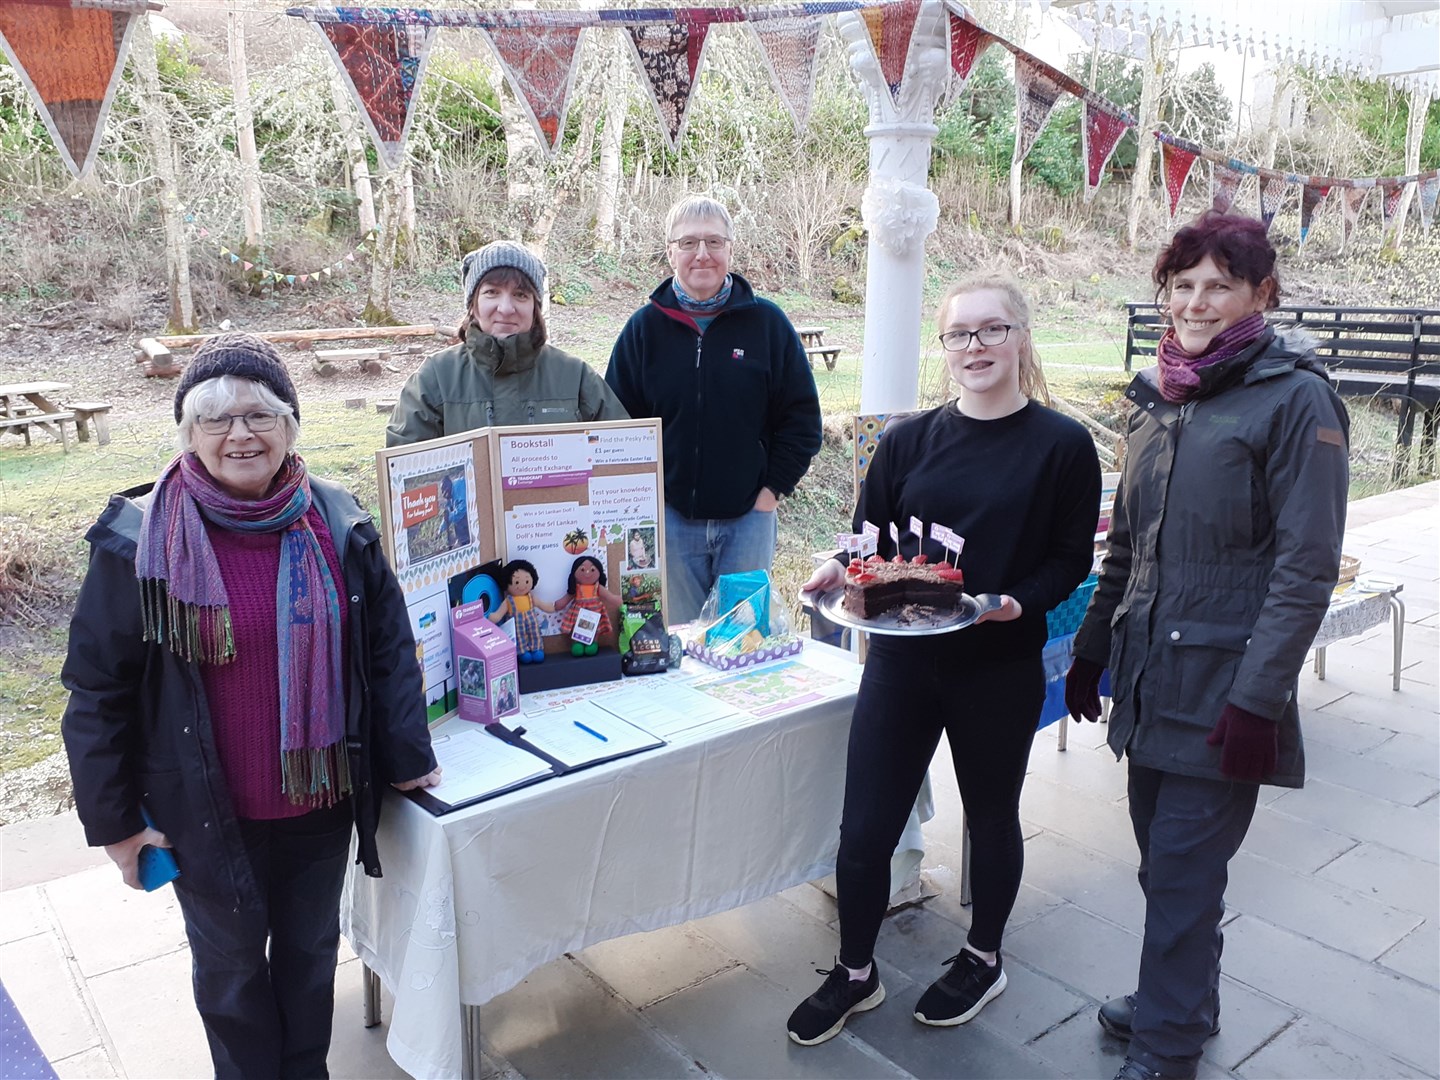 Islay Crisco from the Museum café presents their indulgent Fair Trade chocolate cake, and with heron the photo are Strathpeffer Fairtrade Group members (left to right) Pat Justad, Ann Evans, DennisOverton and Judith van Klaveren.